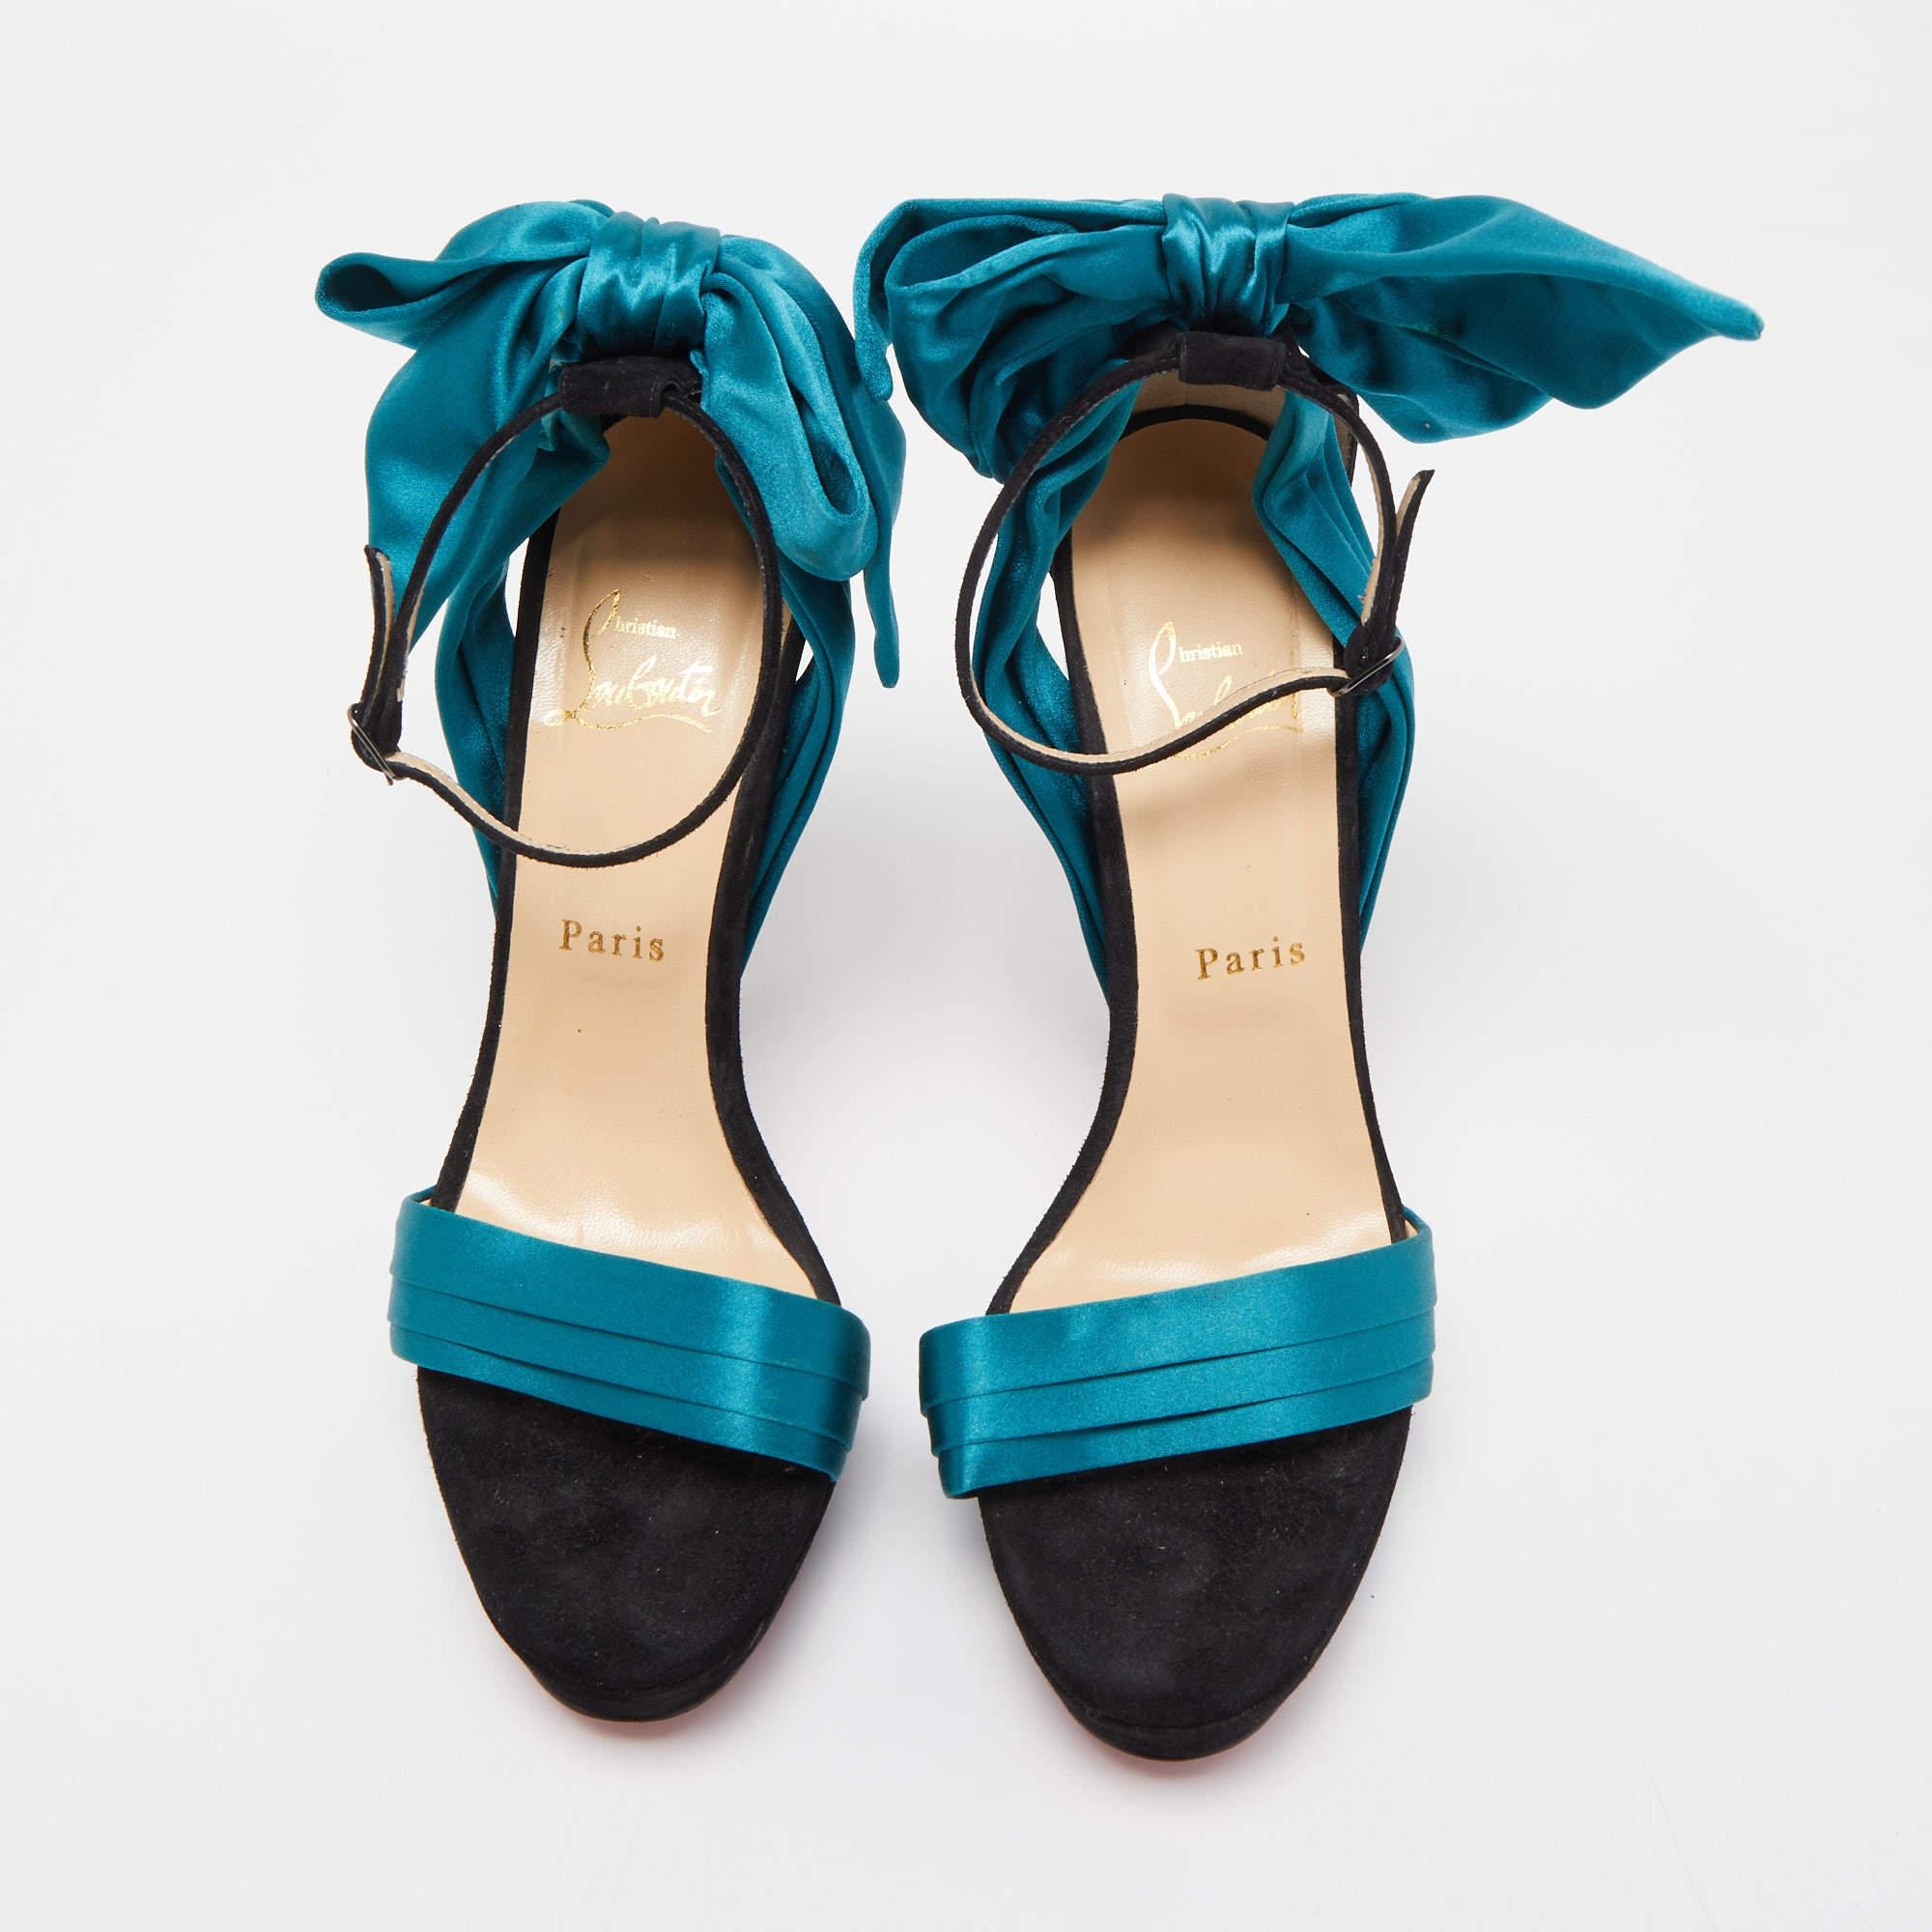 Christian Louboutin Teal/Black Satin and Suede Vampanodo Sandals Size 40.5 3